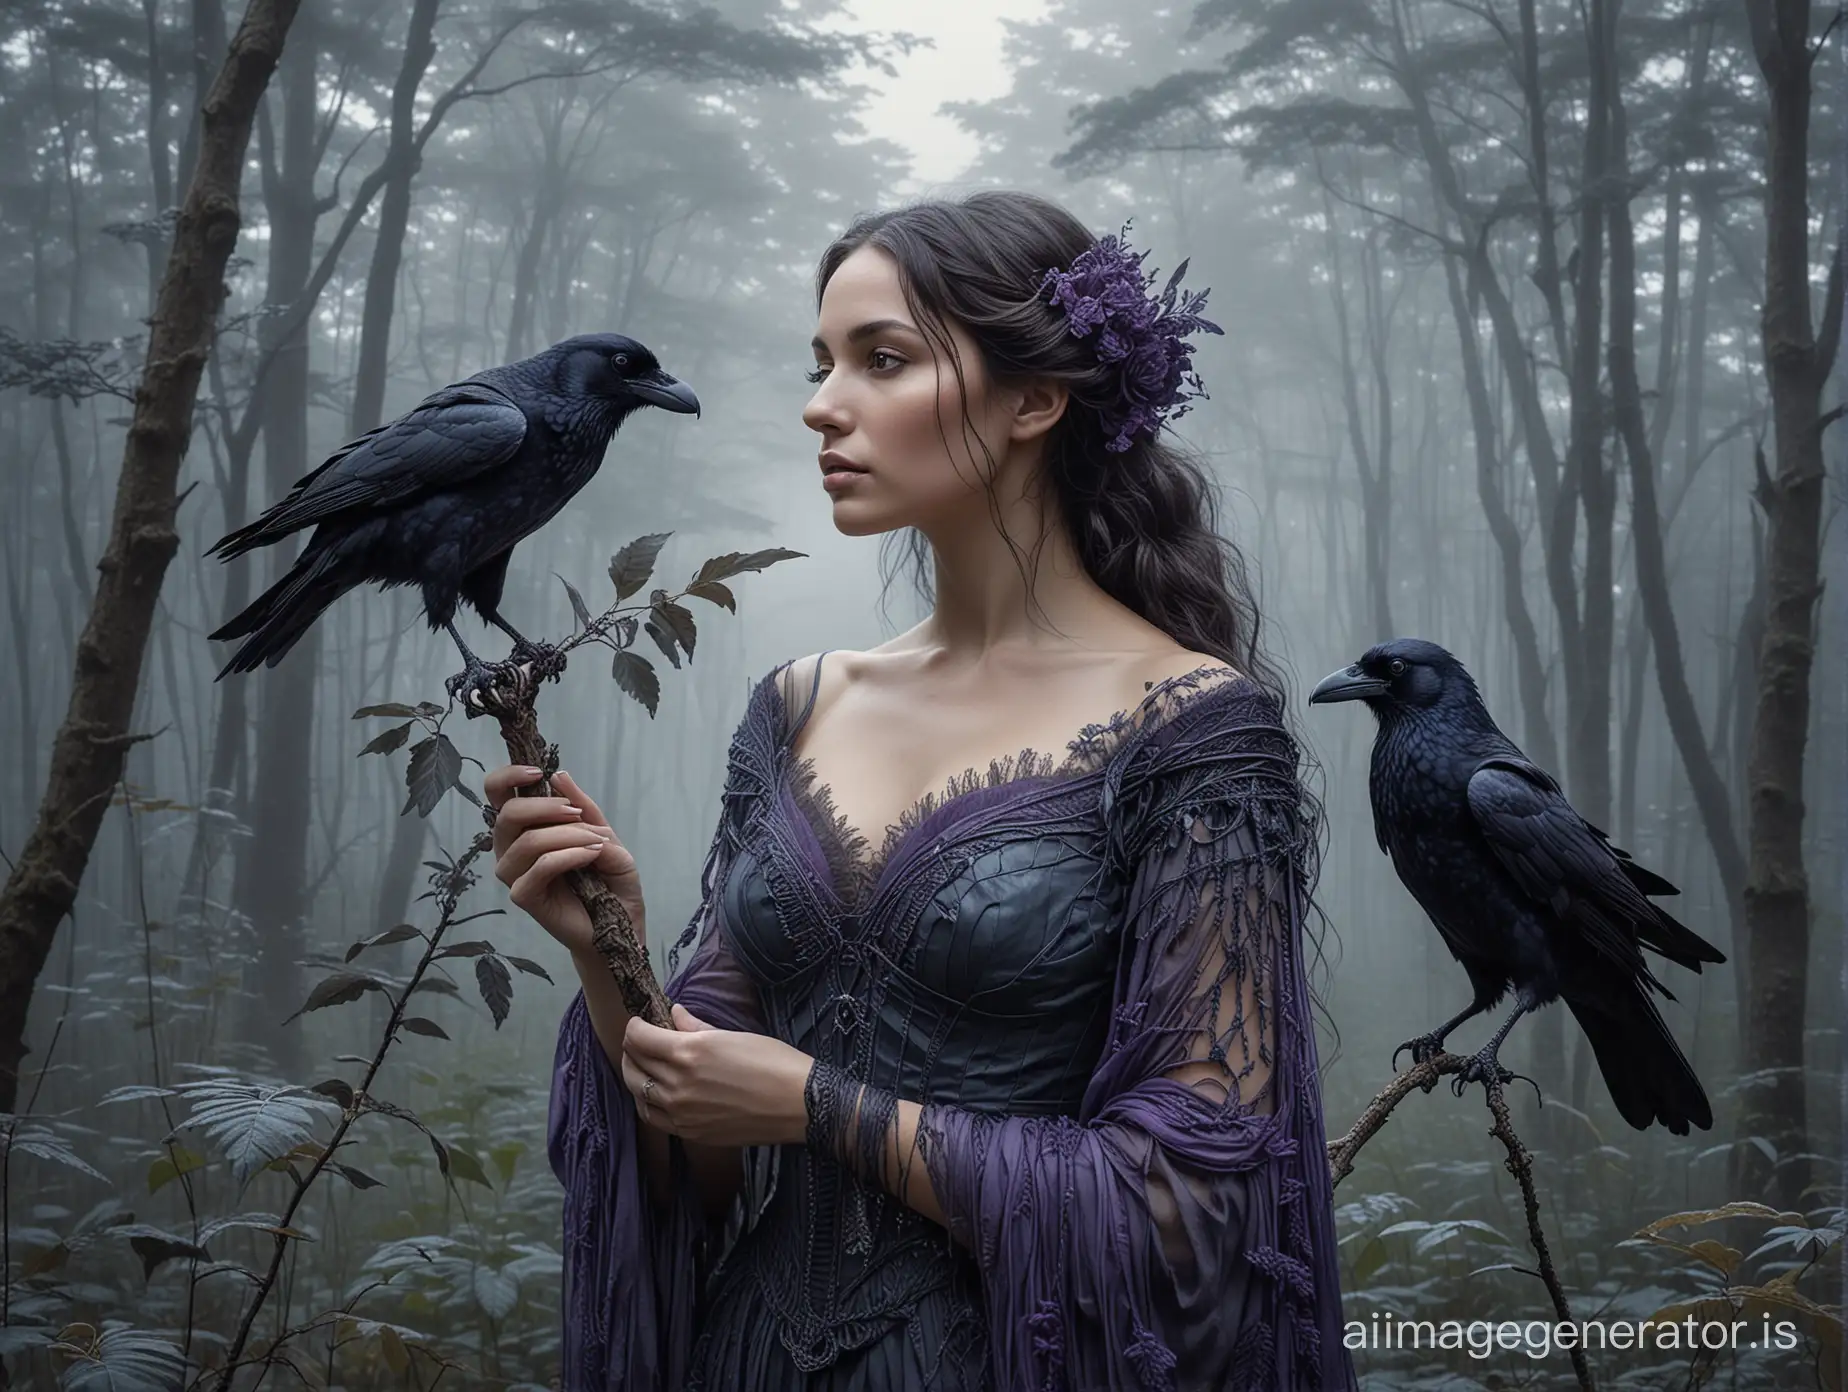 Fibonacci sequence and beauty, feminine, woman with raven pet, dark forest, beauty in elegant form with curves, fine line details and intricate textures, organic, lively and vivid, dynamic composition, blue, purple, gray, white, with thick border of white and gray fog all around the image